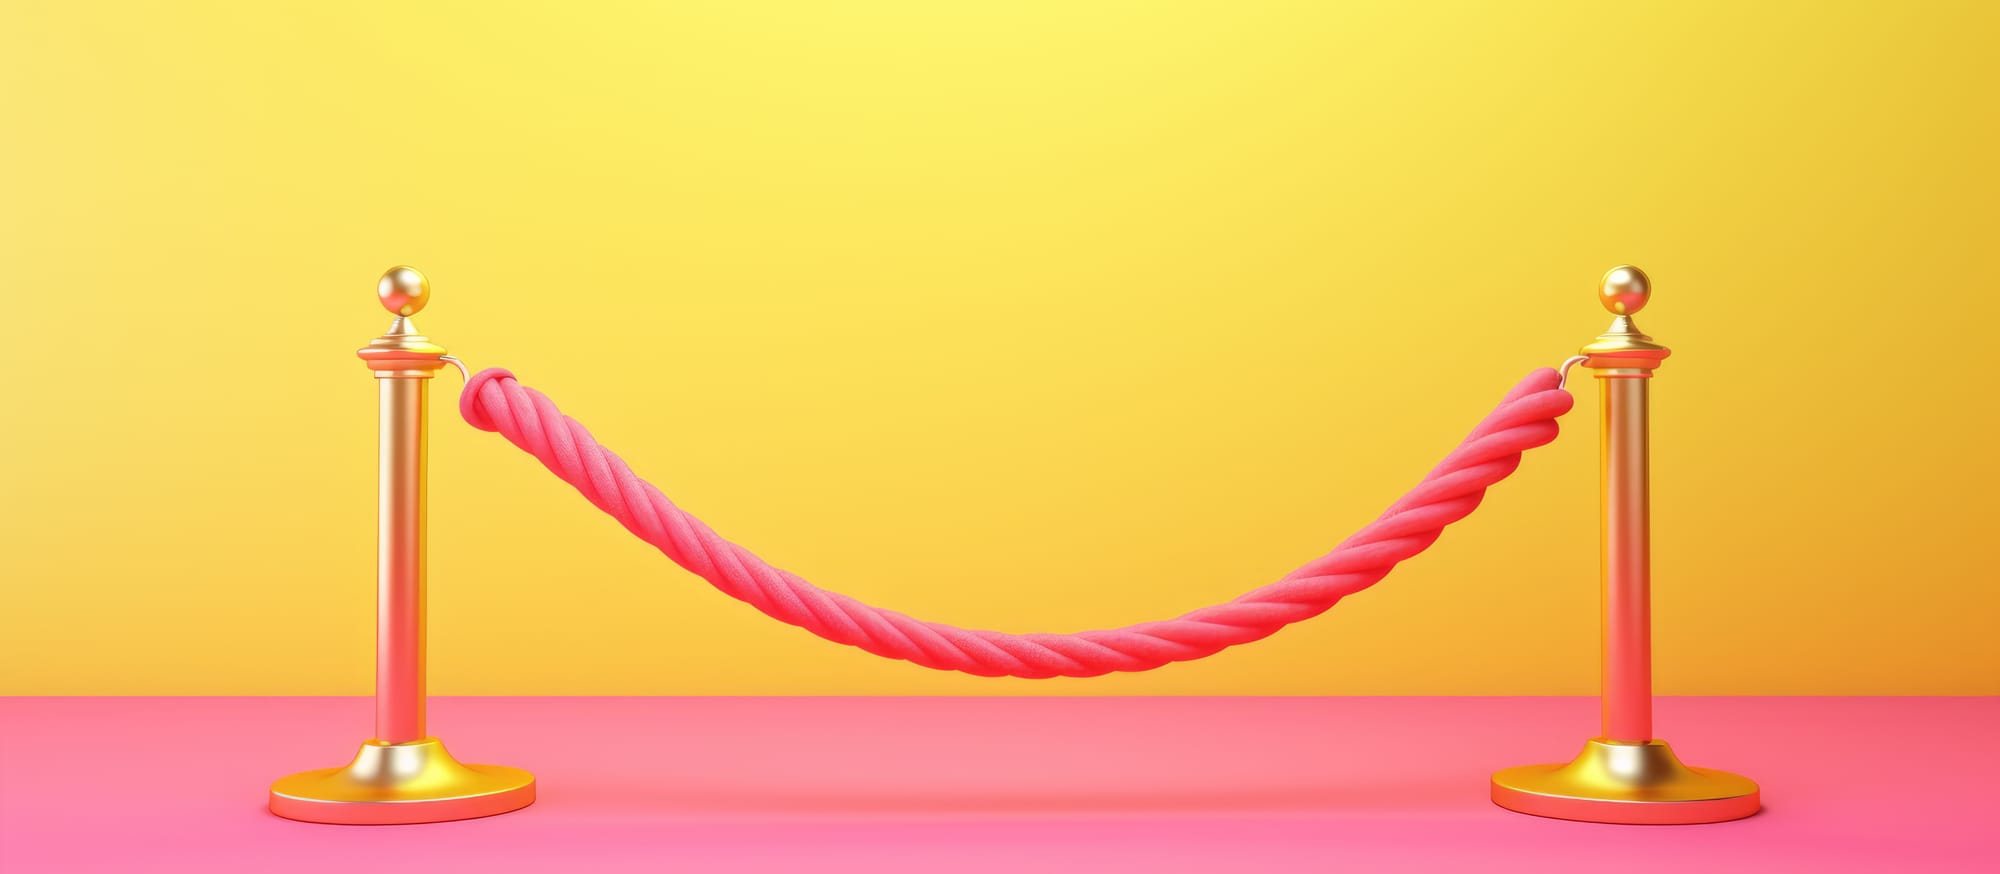 Minimalistic pink rope barrier. 